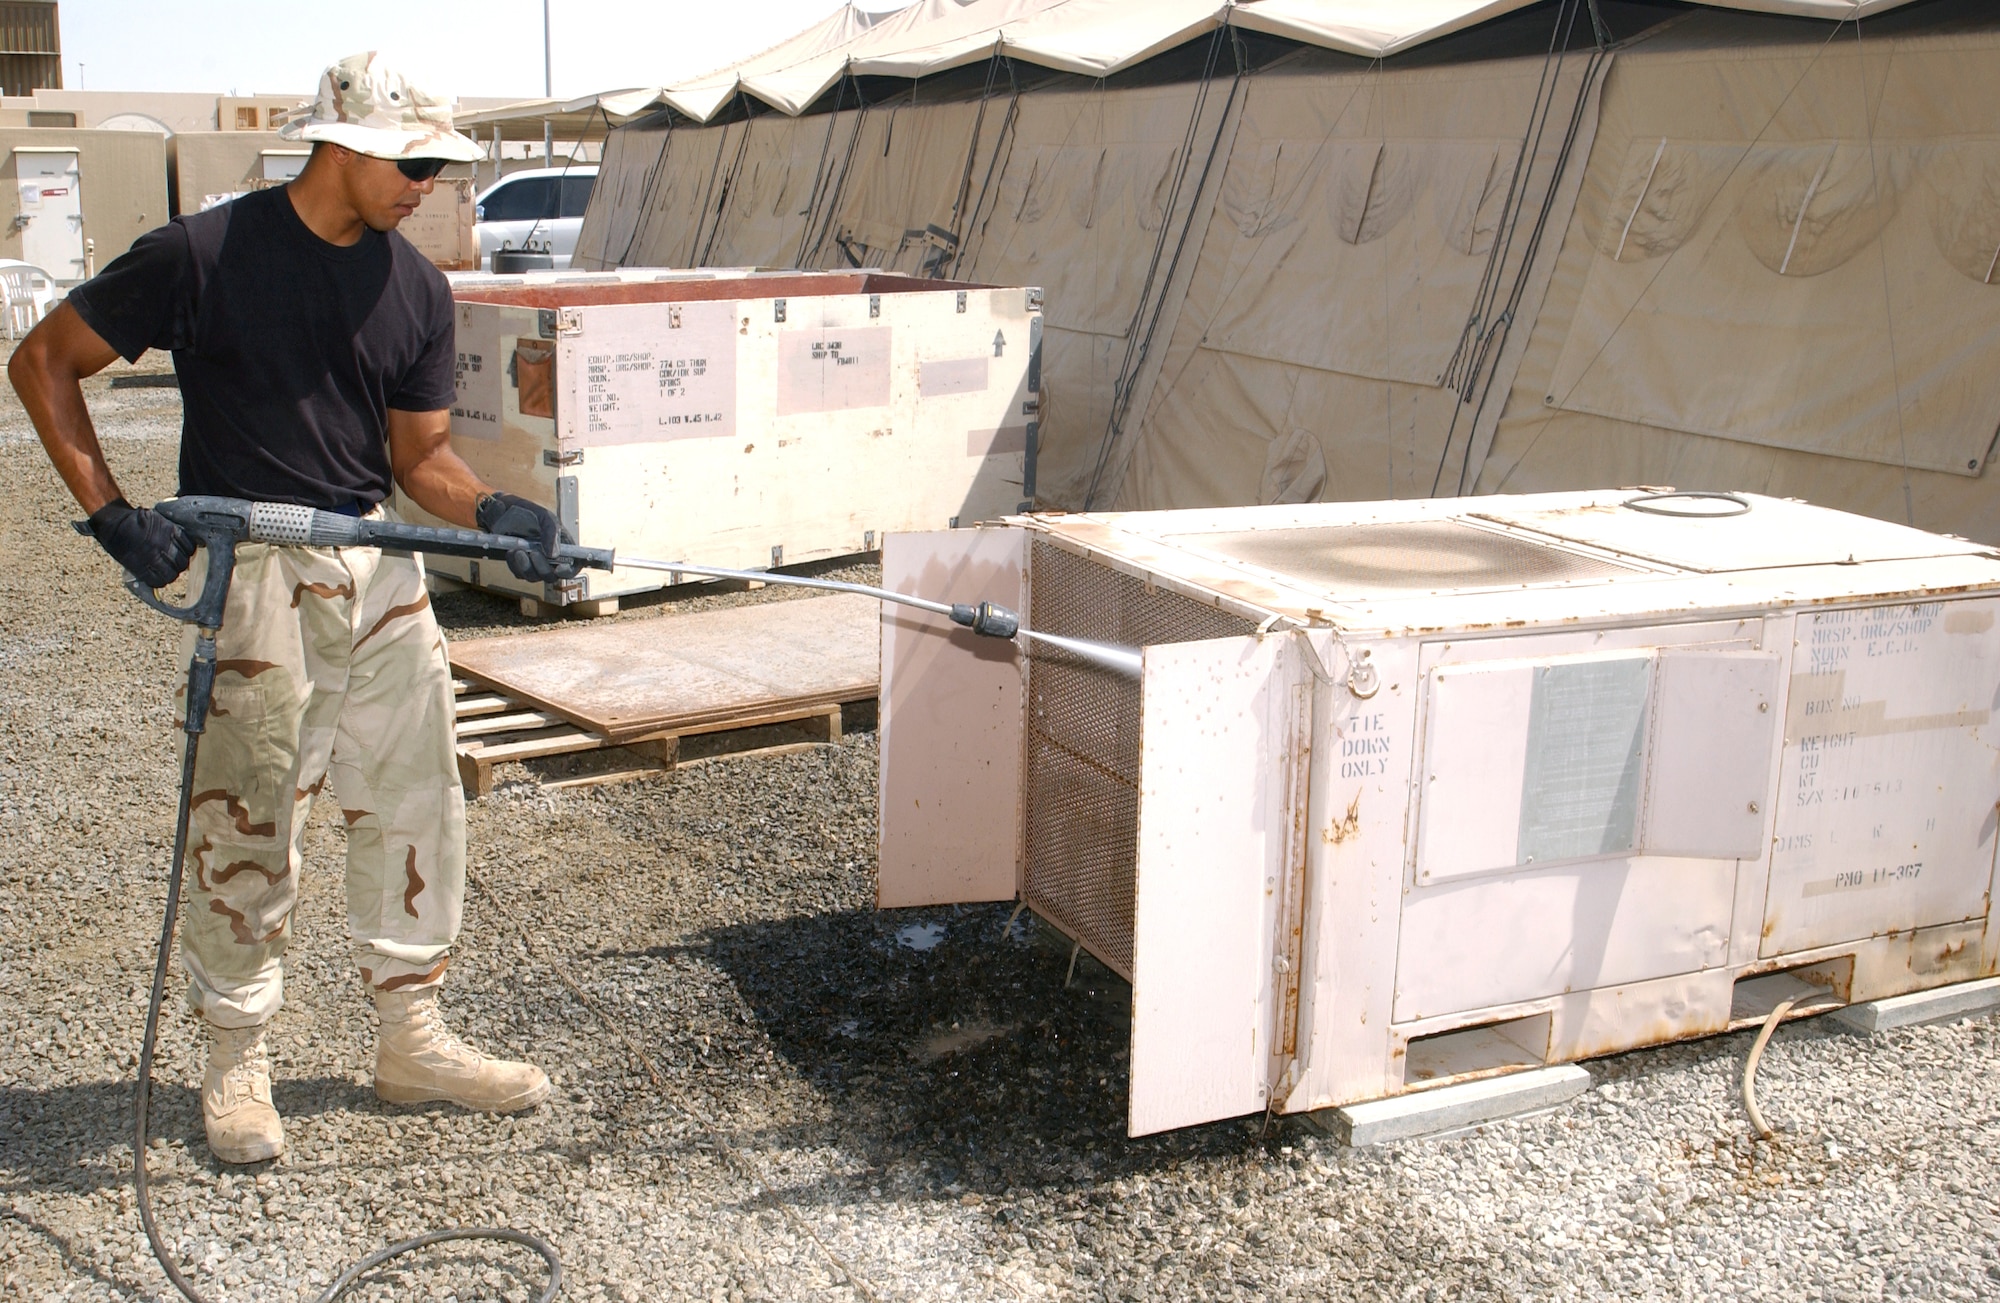 Senior Airman Robert George sprays the coils of an air-conditioning unit with water outside one of the dining facilities at this deployed location in Southwest Asia Oct. 11. The water rinses off hydrochloric acid used previously to clean sand, grit and debris from the unit's coils, which are much like that of an automobile radiator. There are better than 3,000 air-conditioning units at this base, which is home to about 1,500 Airmen and the 380th Air Expeditionary Wing. Airman George is assigned to the 380th Expeditionary Civil Engineer Squadron and deployed from Yokota Air Base, Japan. (U.S. Air Force photo/Master Sgt. Jason Tudor)
